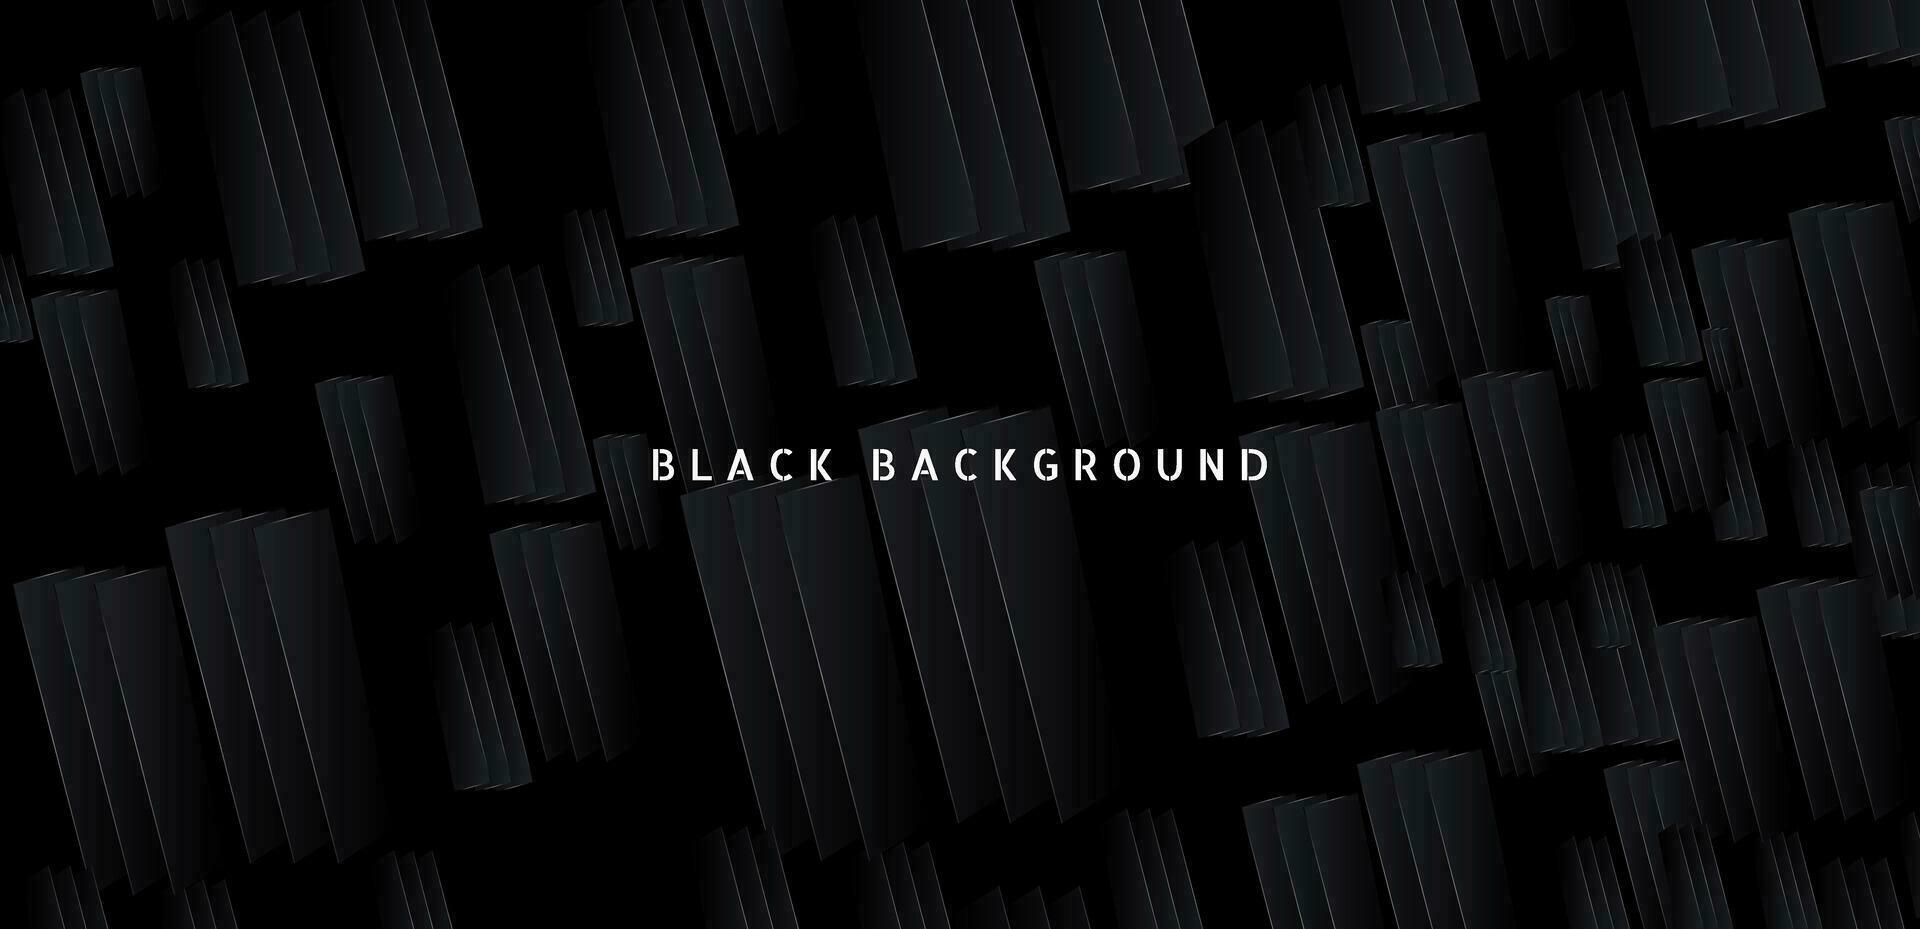 Black premium abstract background with dark geometric shapes. Very suitable for poster, banner, cover, advertisement, wallpaper and futuristic design concept vector